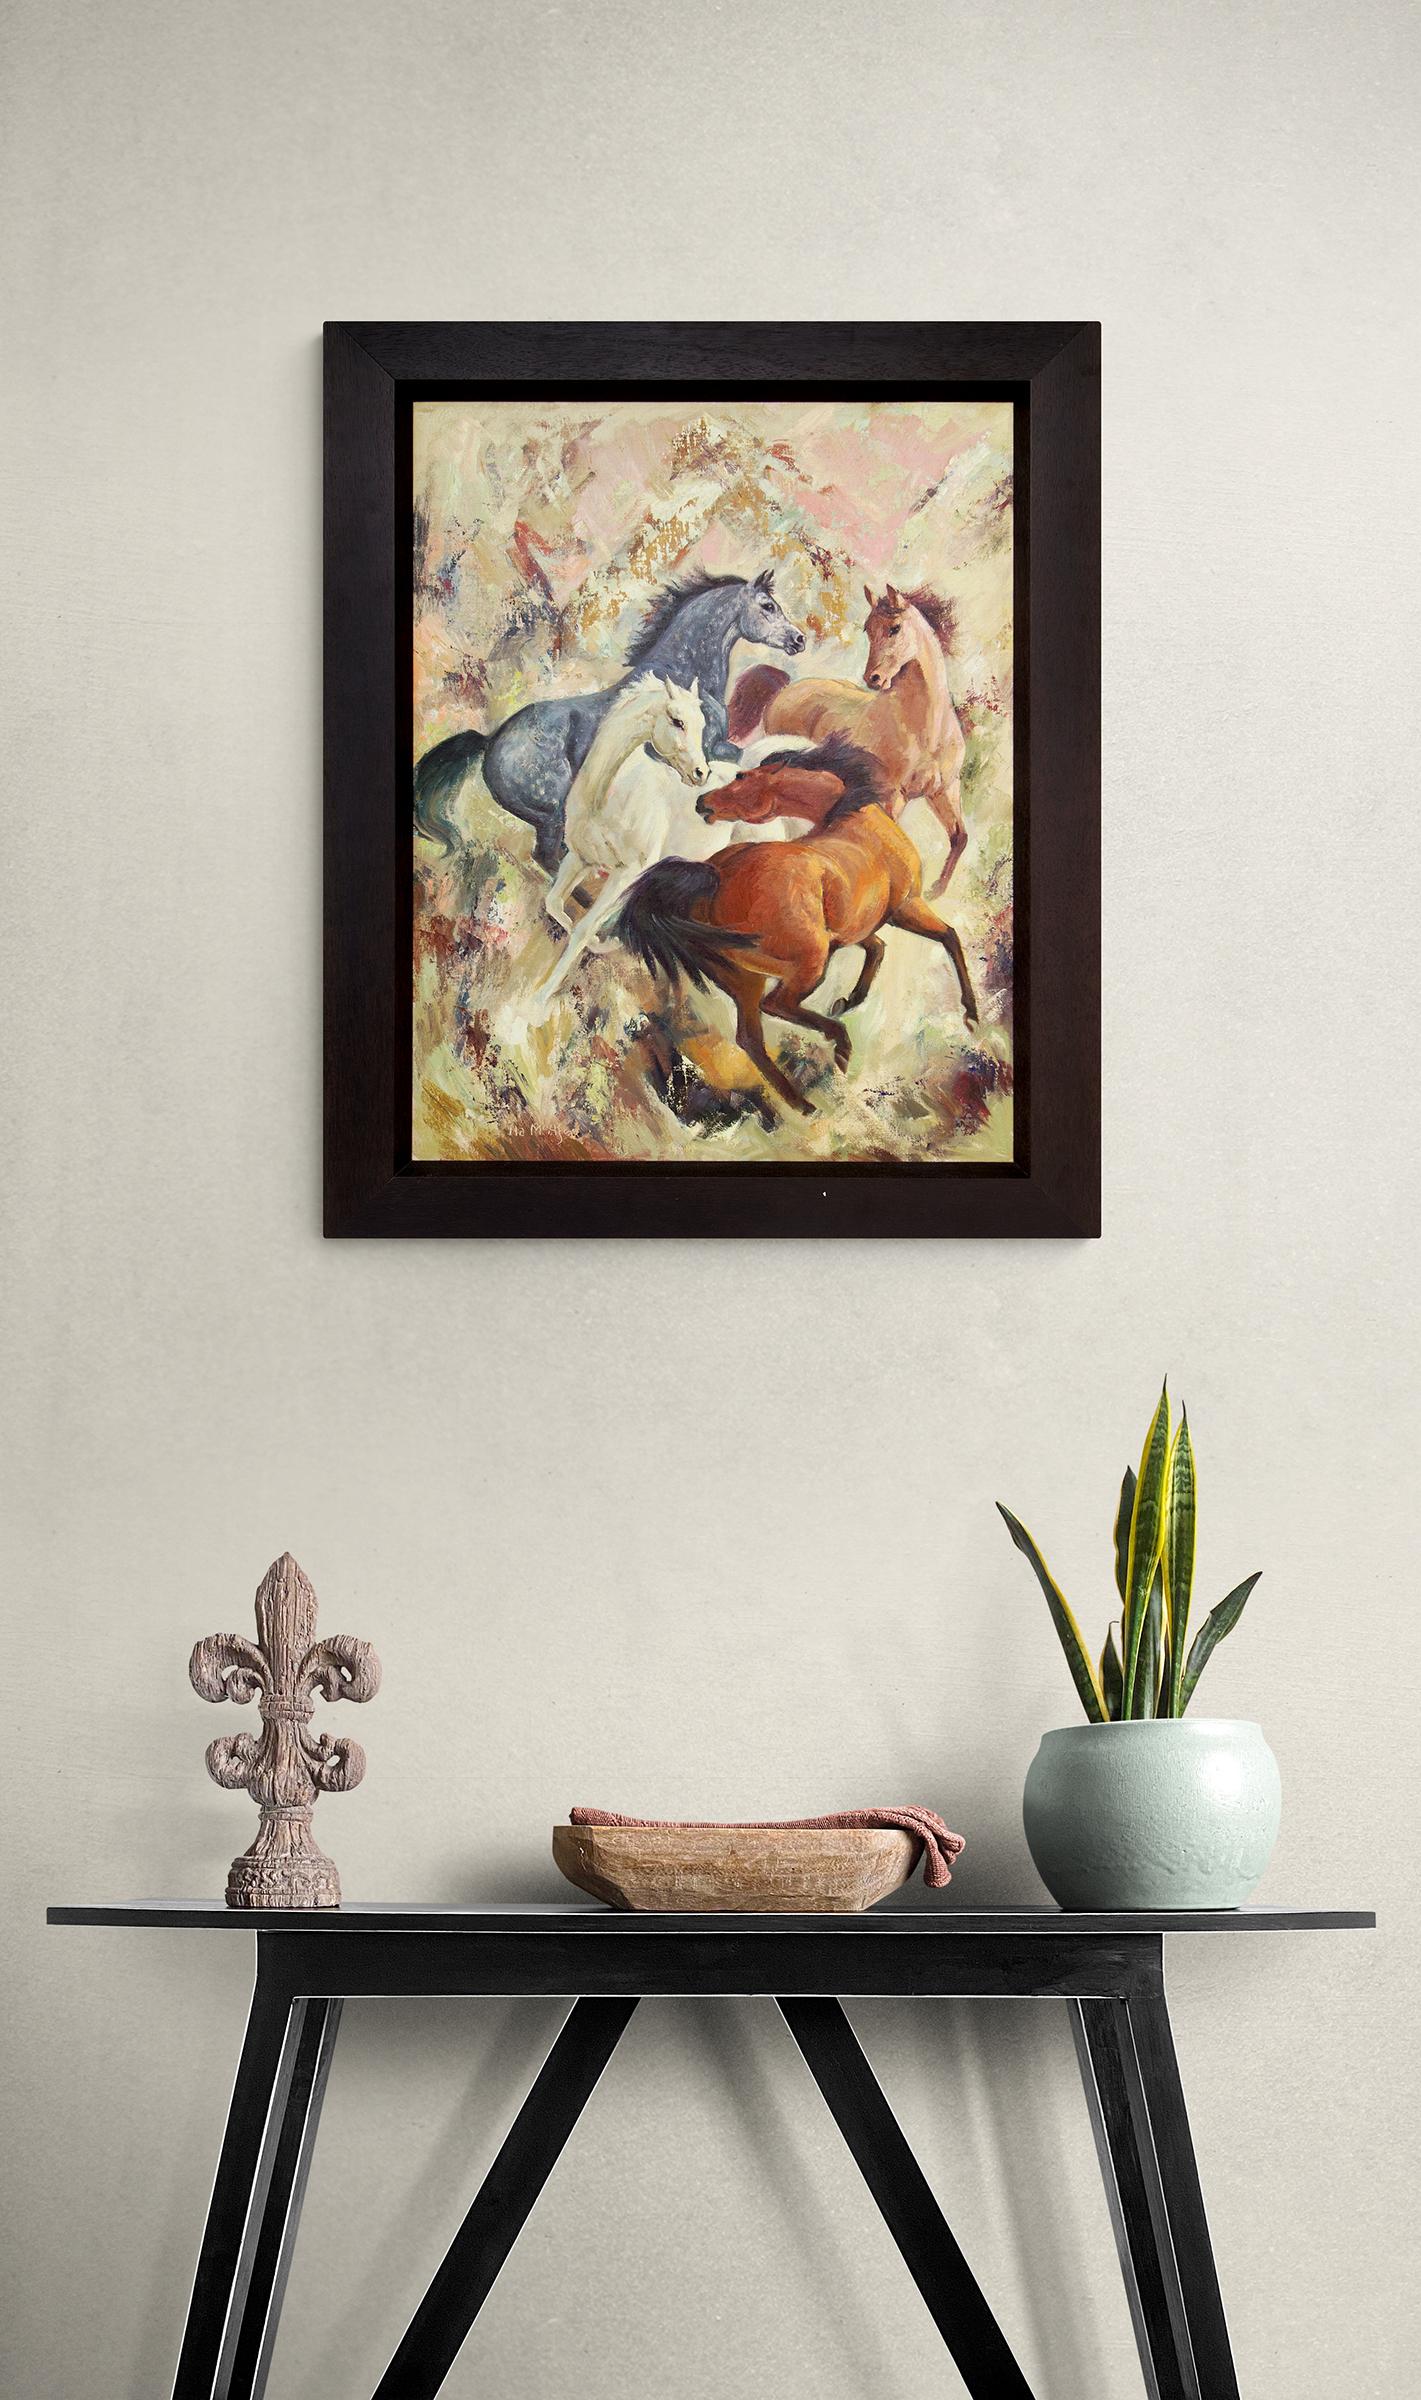 A Little Nippy, Framed Oil Painting with Horses, New Mexico Female Artist For Sale 1